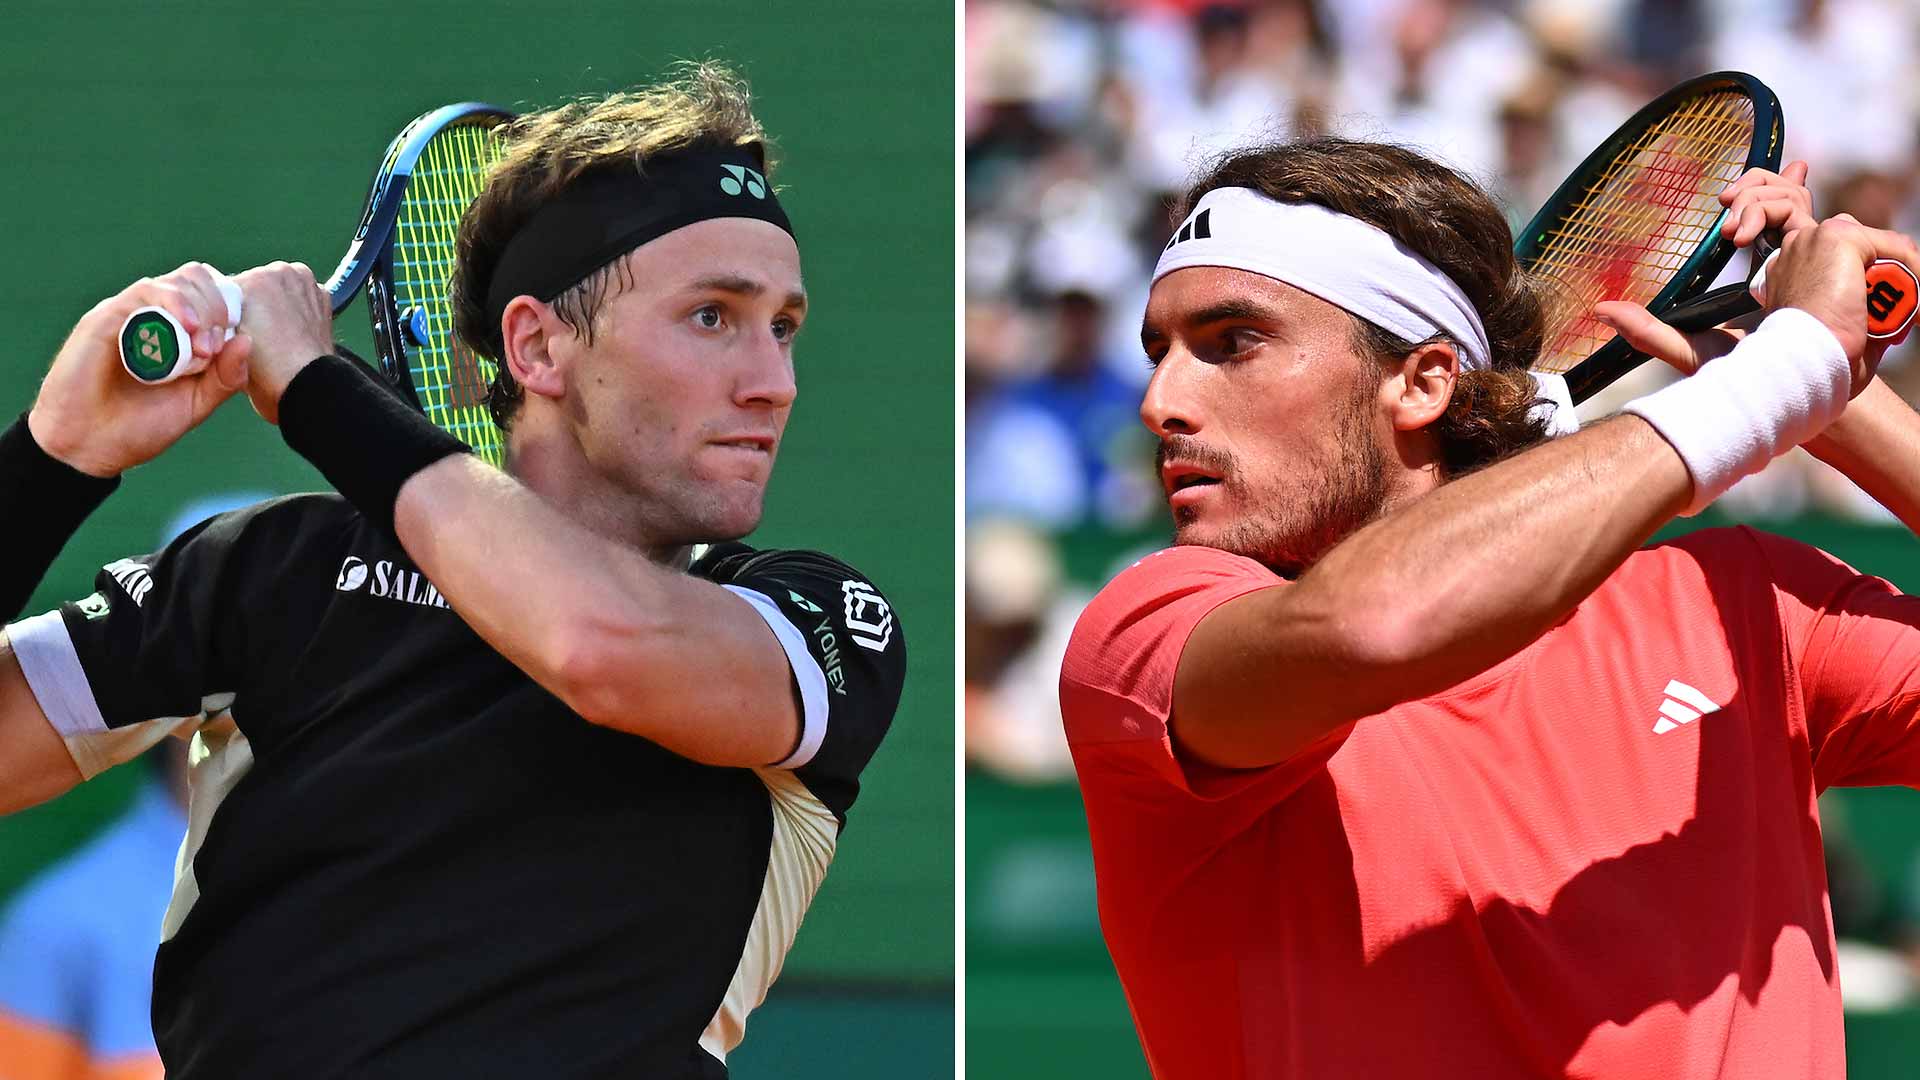 Casper Ruud and Stefanos Tsitsipas meet on Sunday in a high-stakes Monte-Carlo title match.